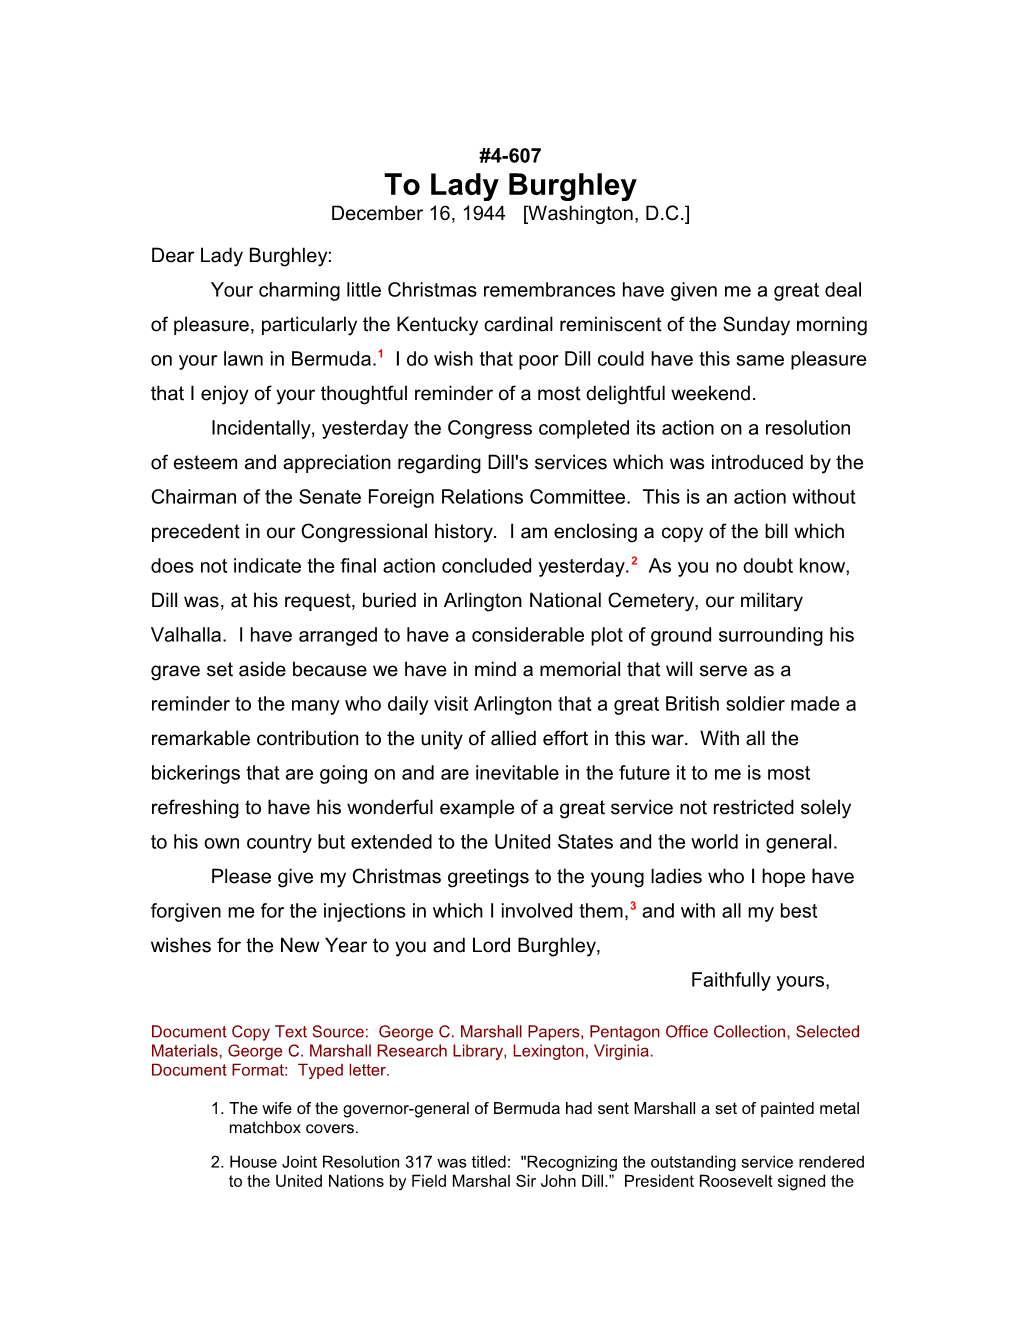 To Lady Burghley